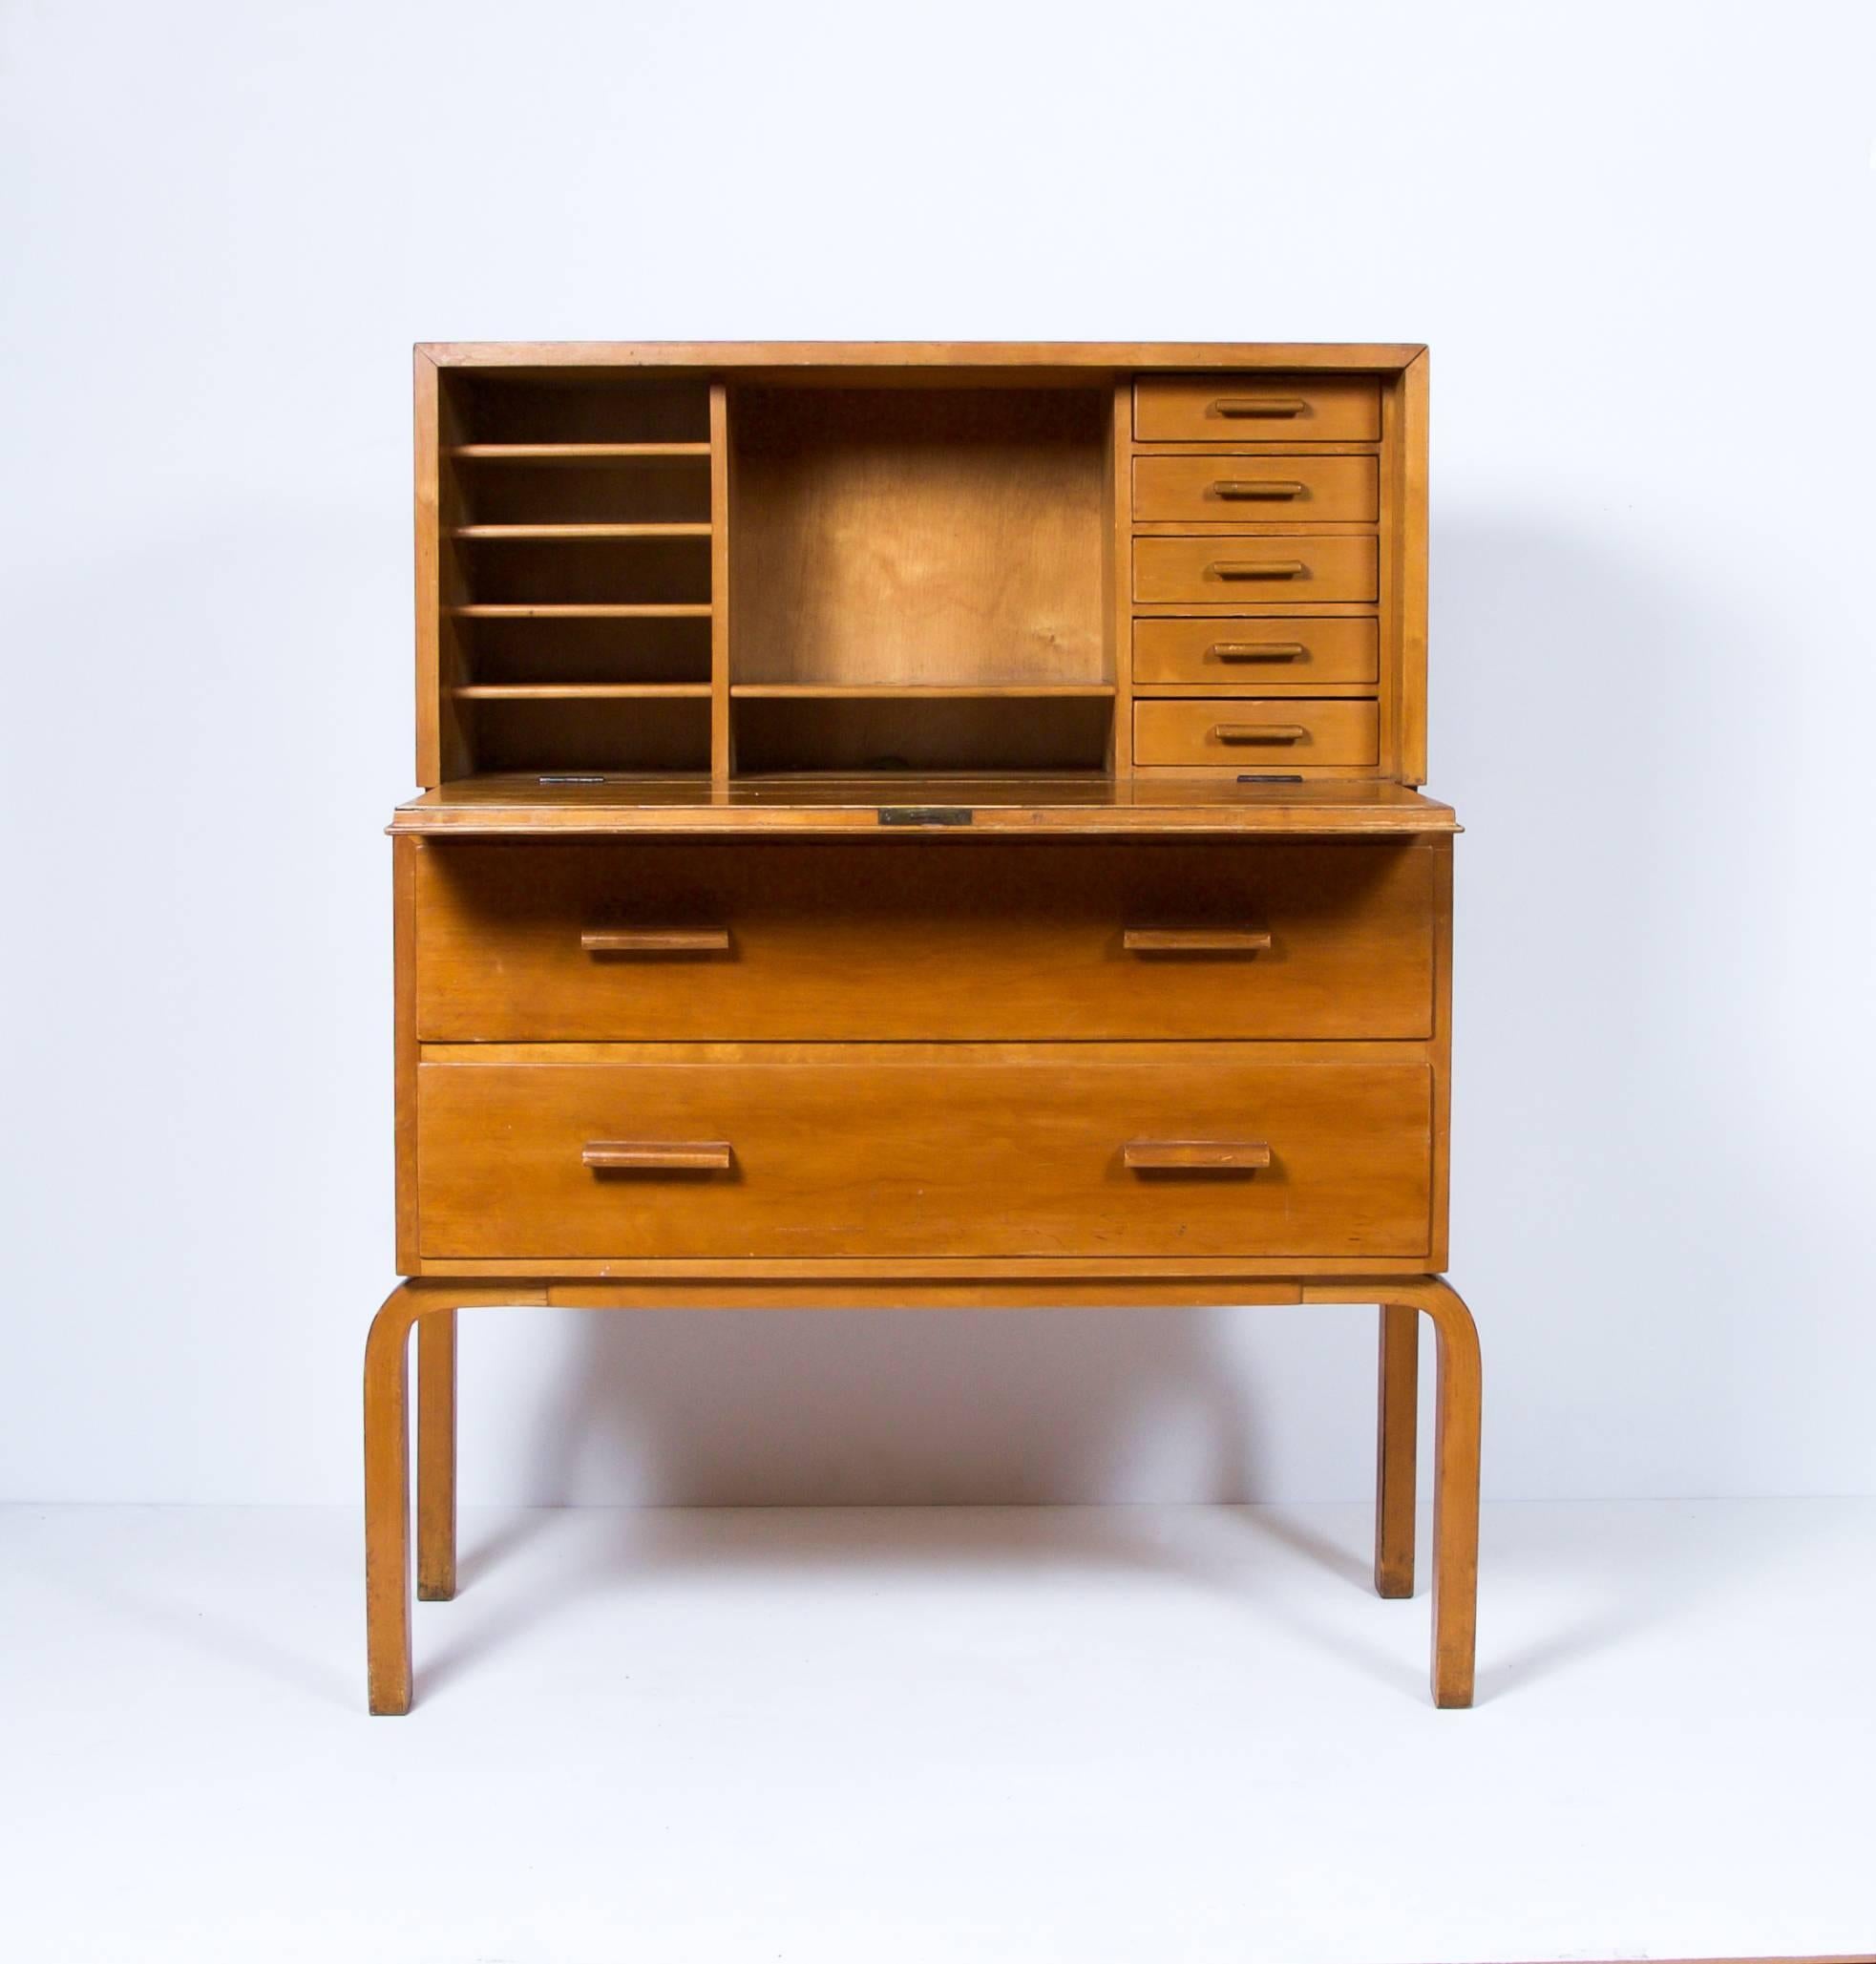 Rare early edition secretary by architect Alvar Aalto with L-legs in original condition.

Drop front desk with five small interior drawers and shelves. Below, two drawers,

Finland, circa 1930s.
Manufactured by Oy Huonekalu- ja